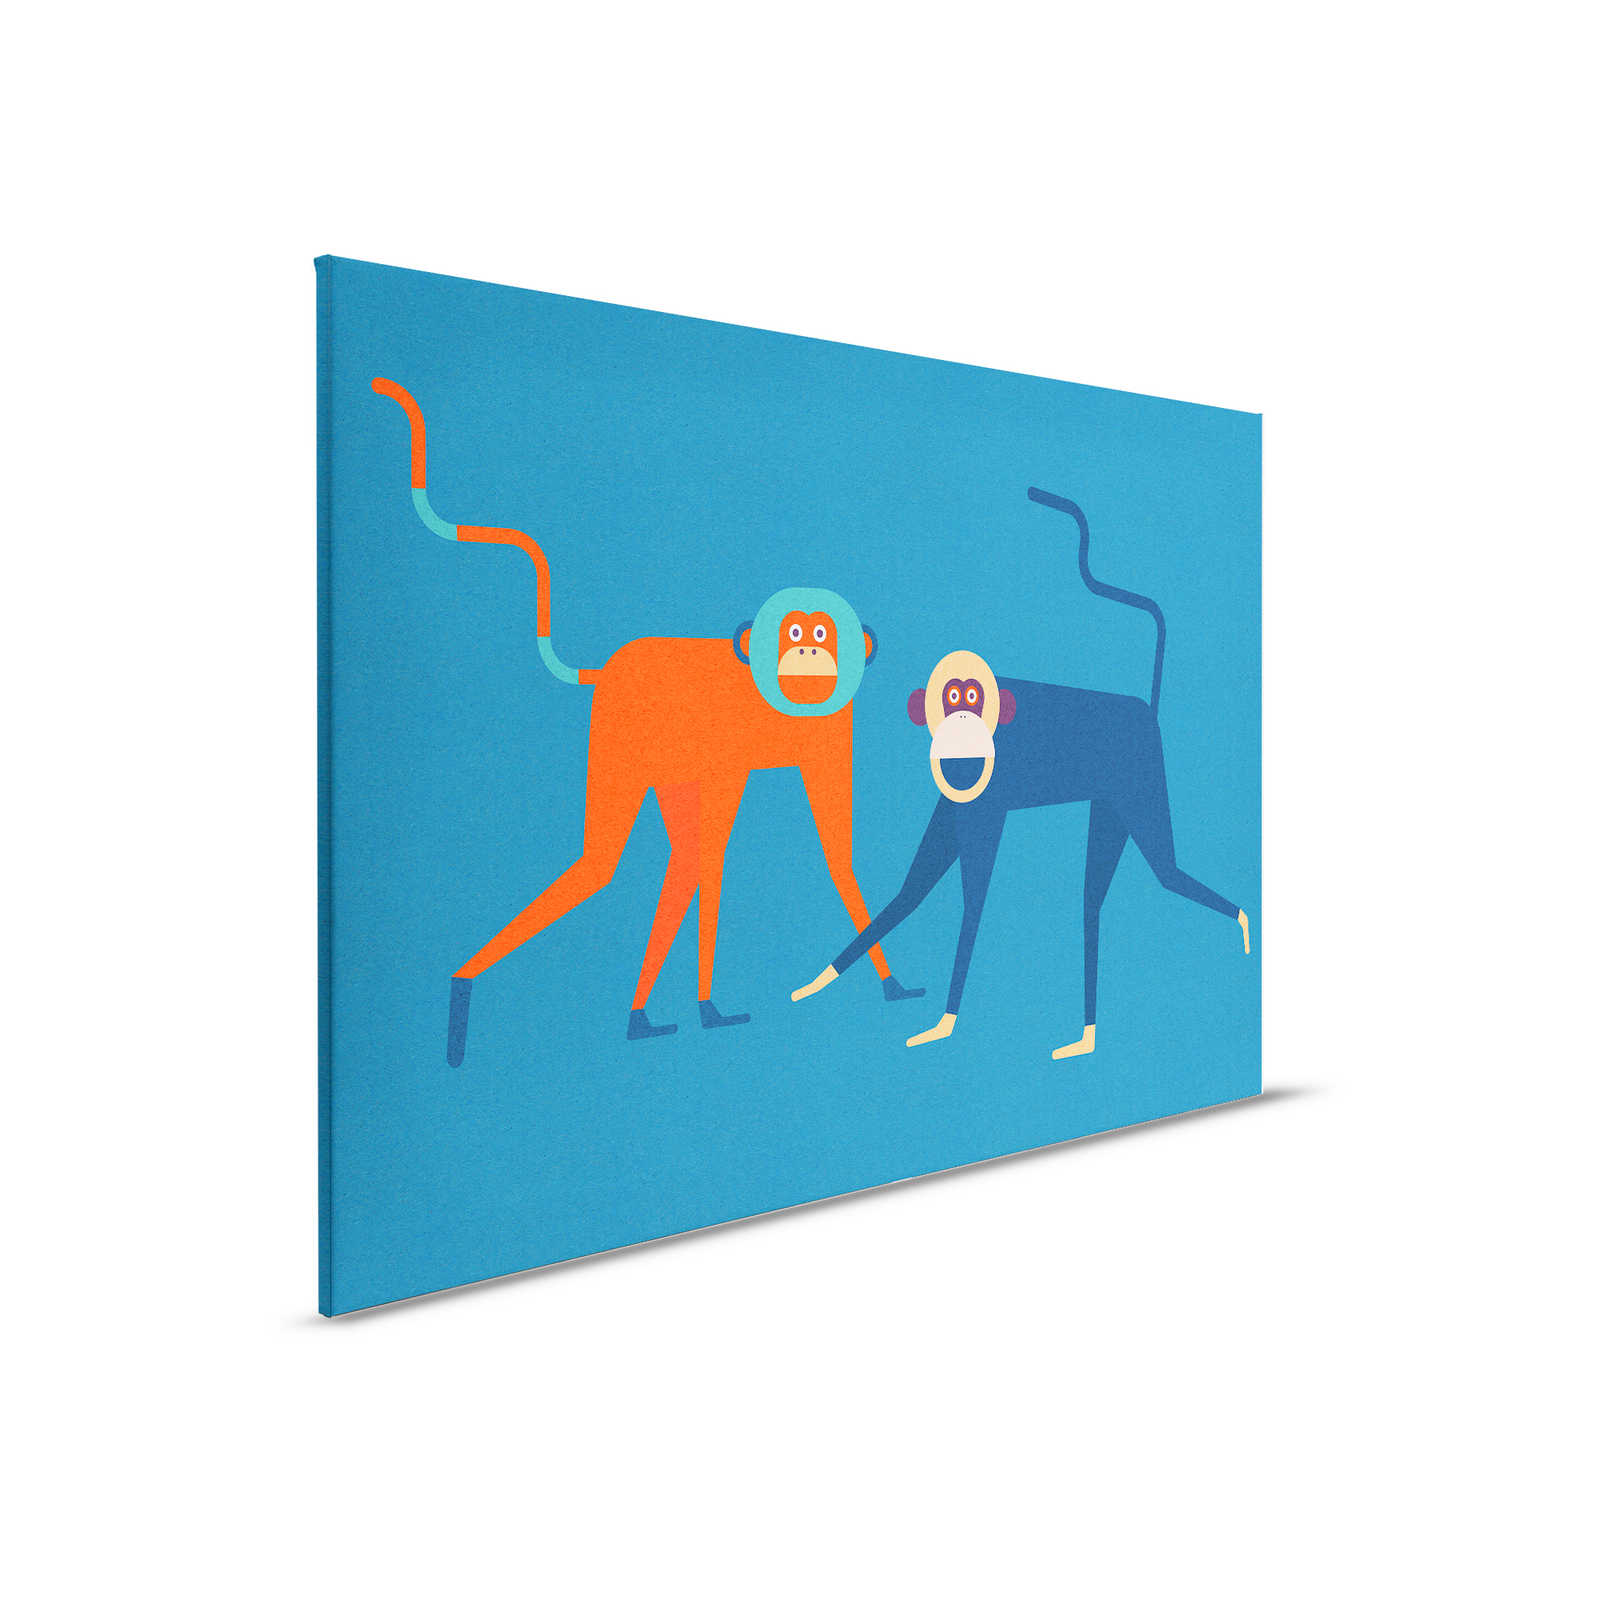         Monkey Business 2 - Canvas painting Monkey Gang in comic style - Cardboard structure - 0.90 m x 0.60 m
    